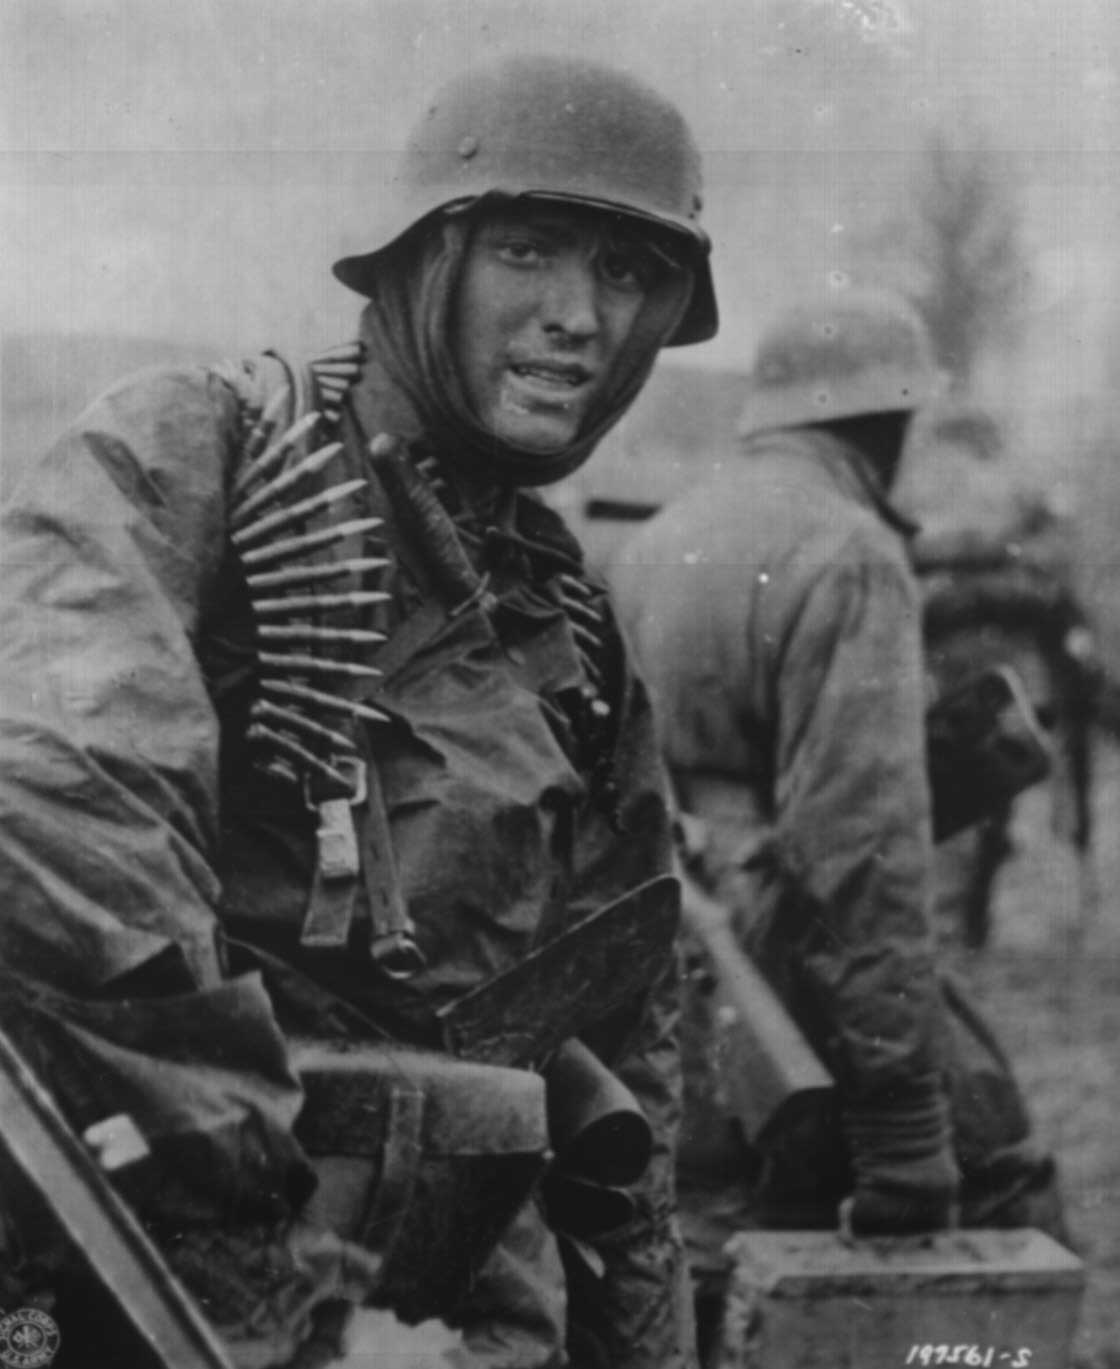 A heavily armed German soldier during the Ardennes Offensive, Dec 1944